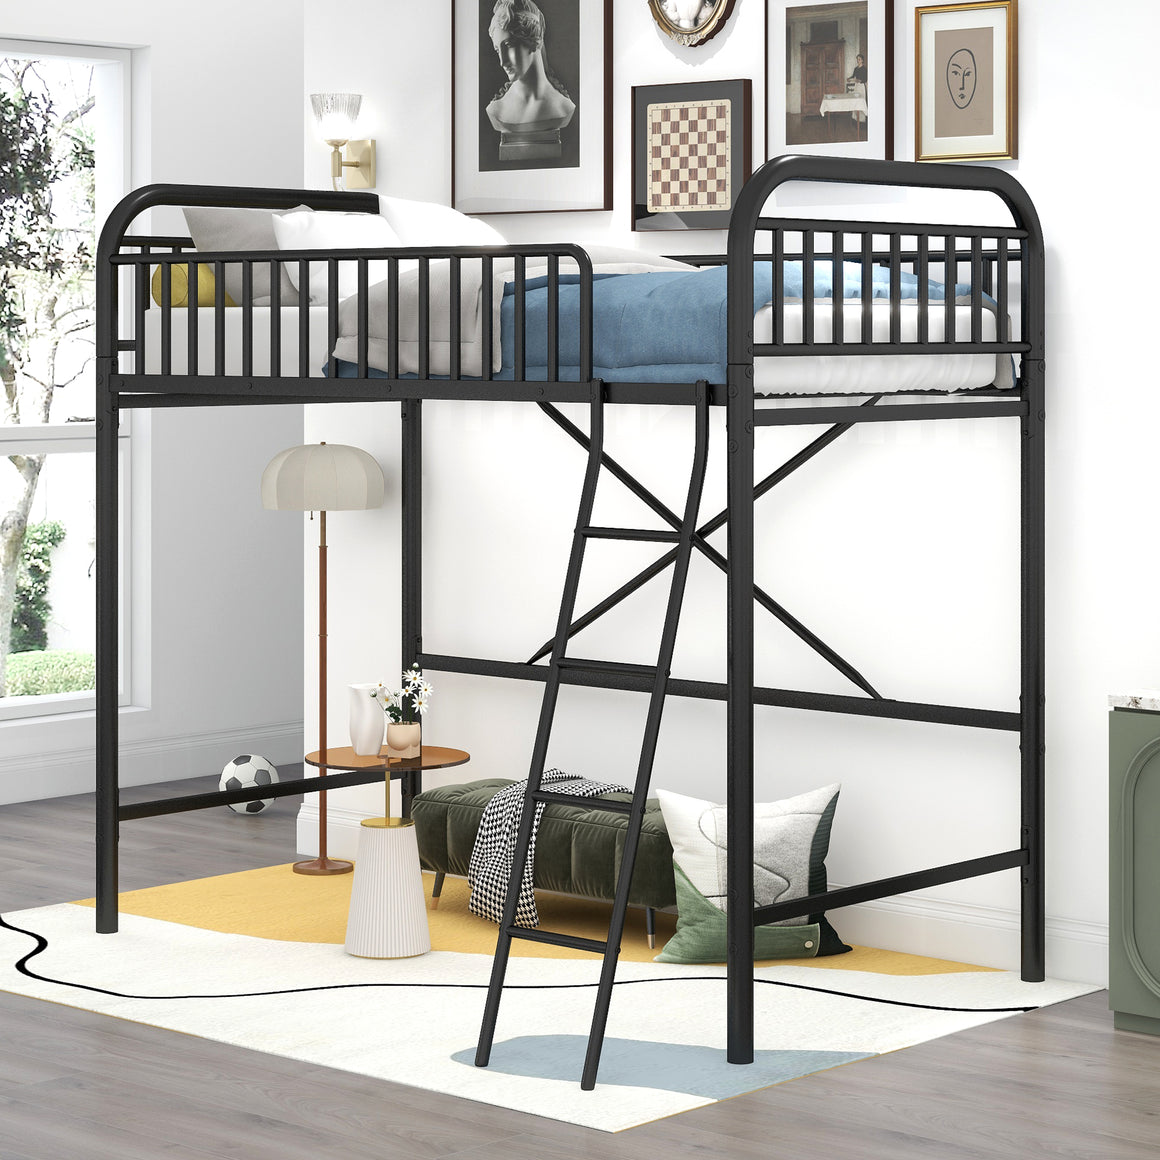 uhomepro Twin Size Metal Loft Bed Frame with Ladder, No Box Spring Needed, Black